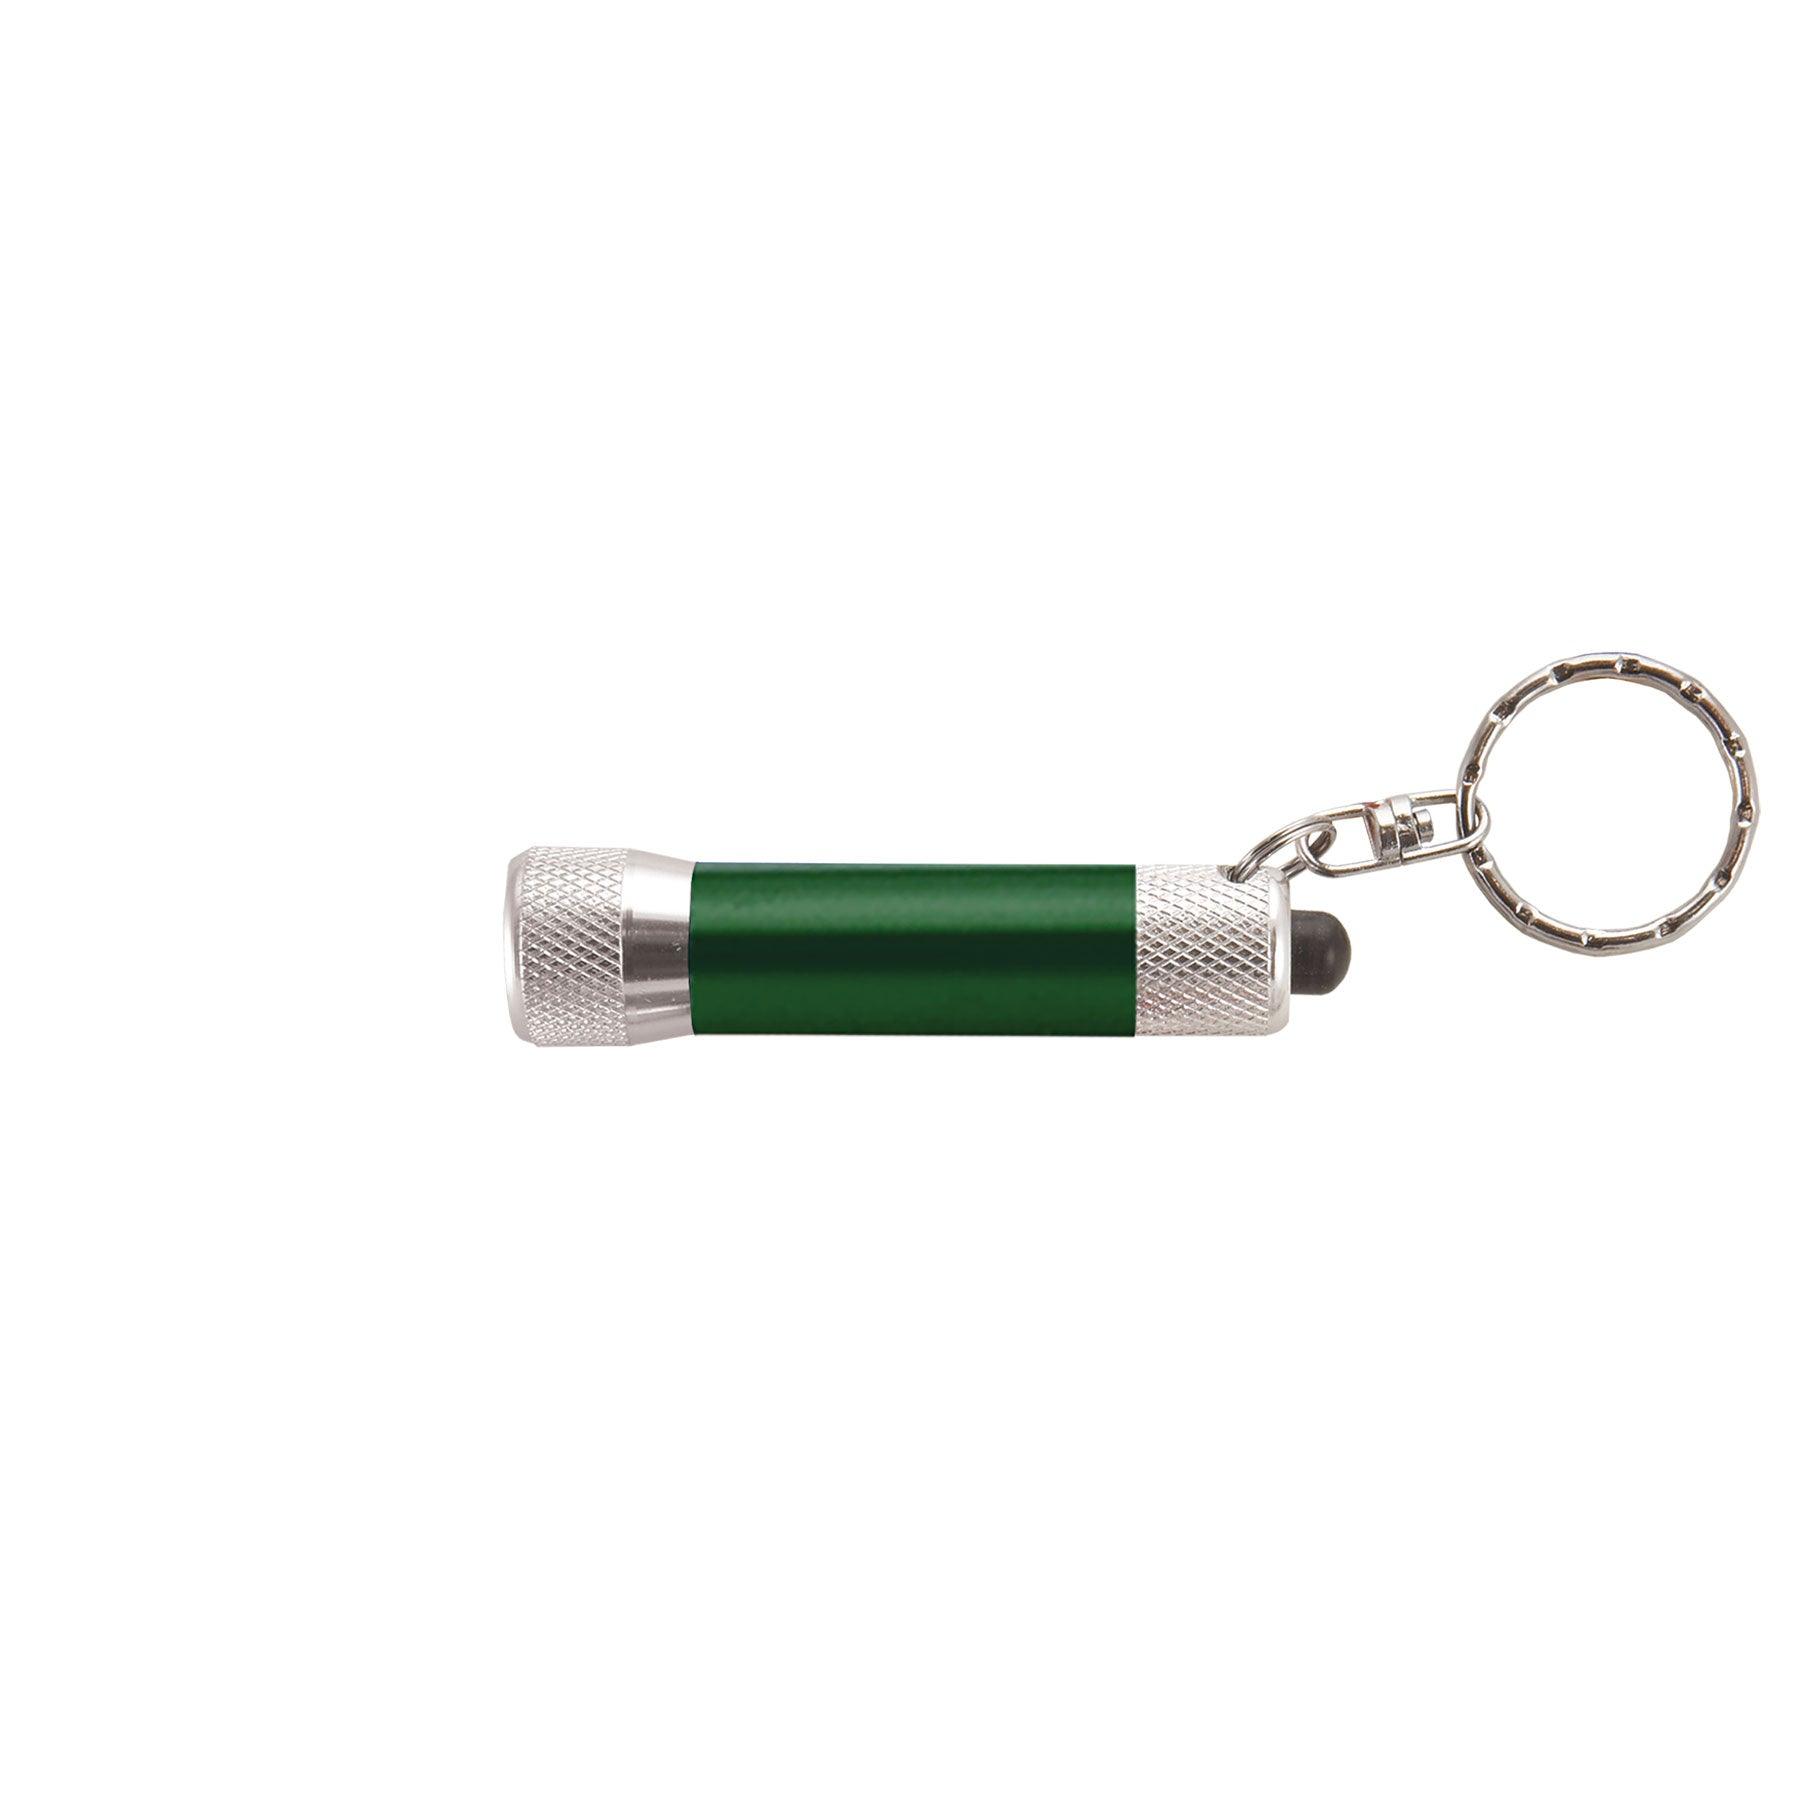 Green Promotional Led keychain - Persopens Promotional Products LTD